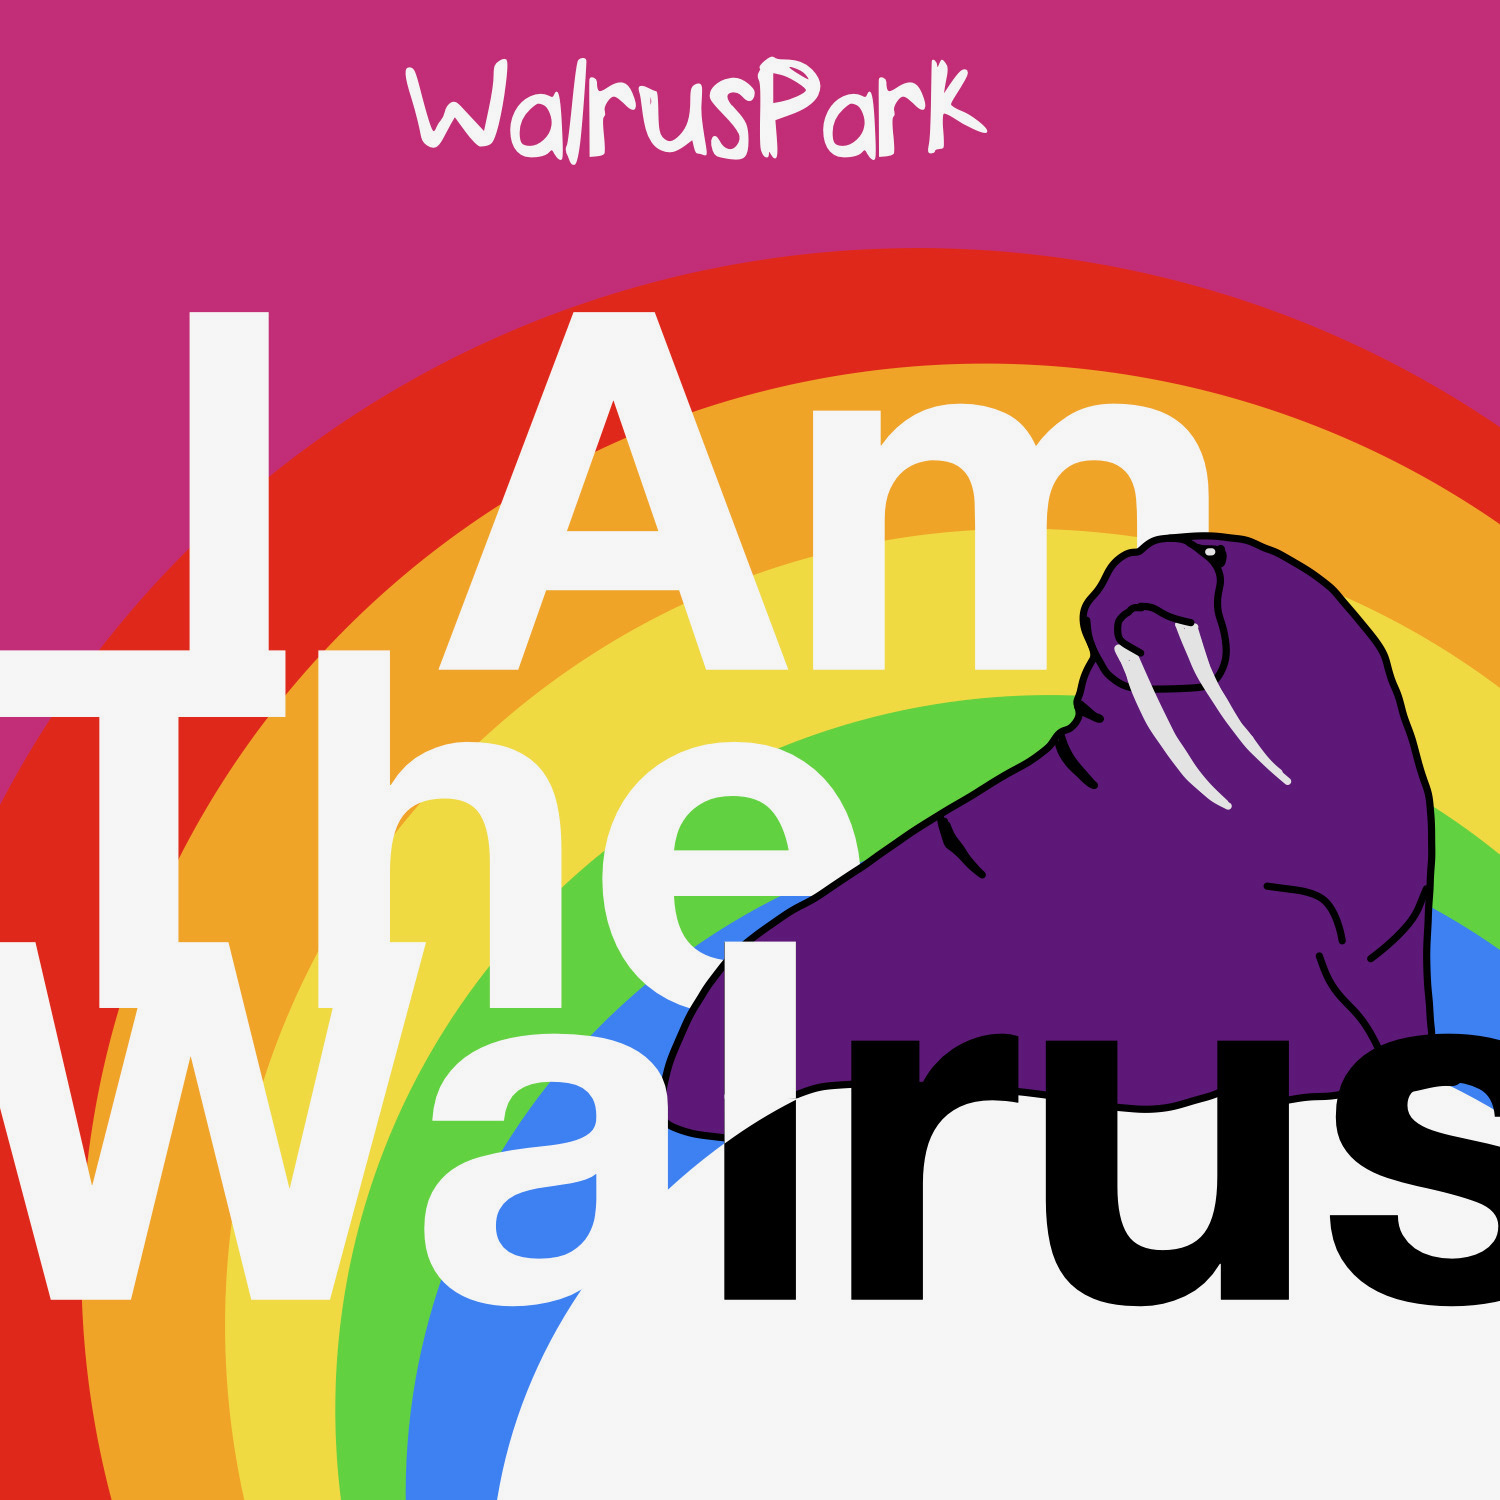 image from I Am the Walrus (The Beatles cover)